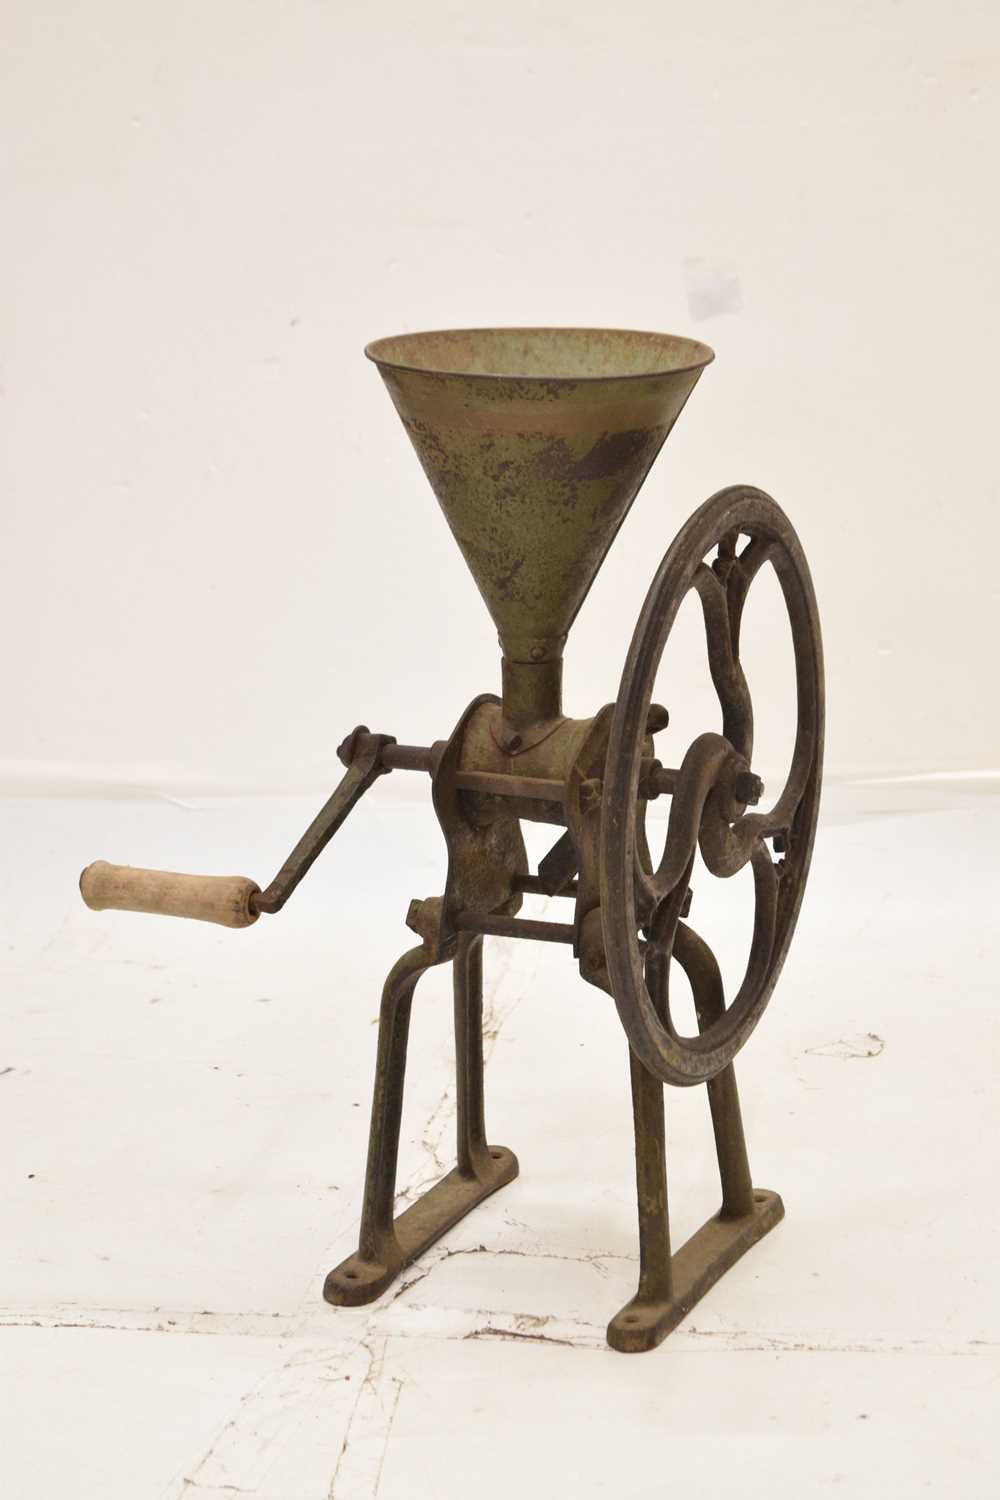 Late 19th century metal coffee grinder - Image 2 of 6